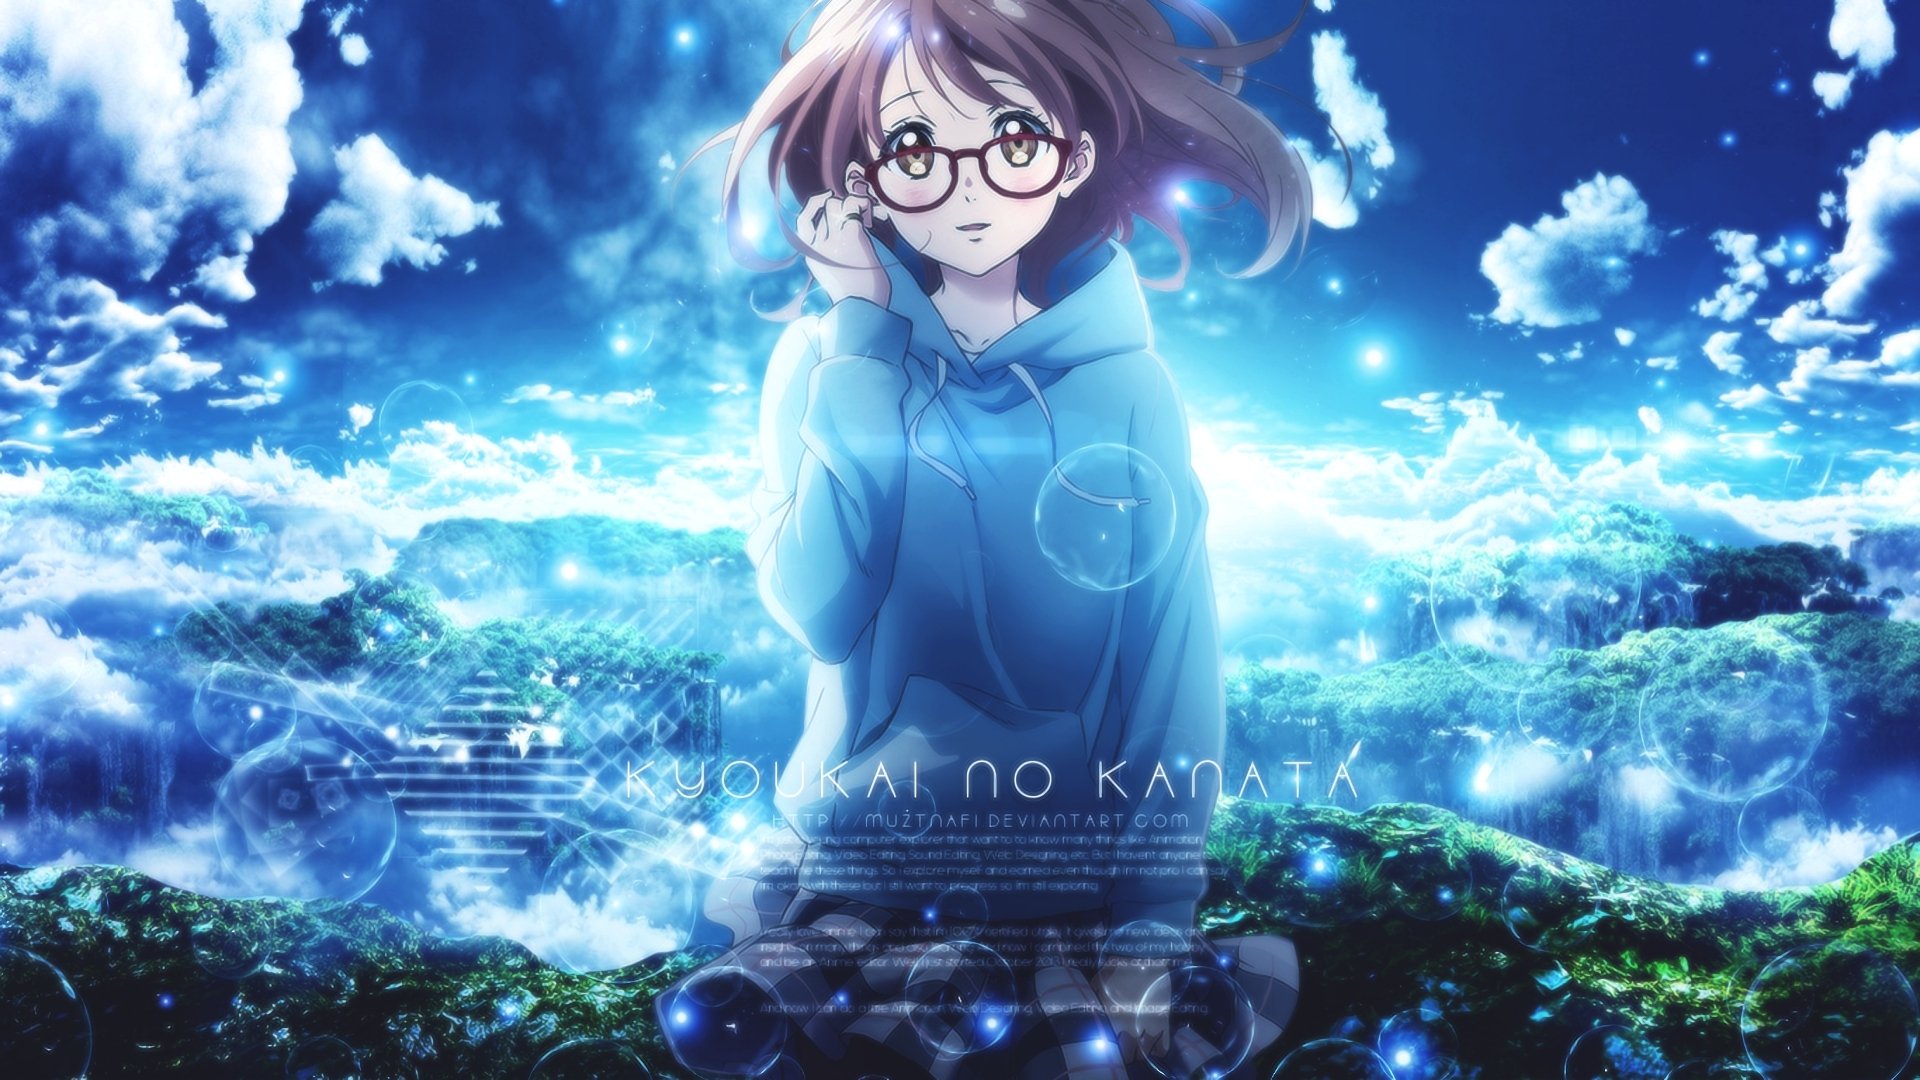 Beyond The Boundary Hd Wallpaper Background Image 1920x1080 Id